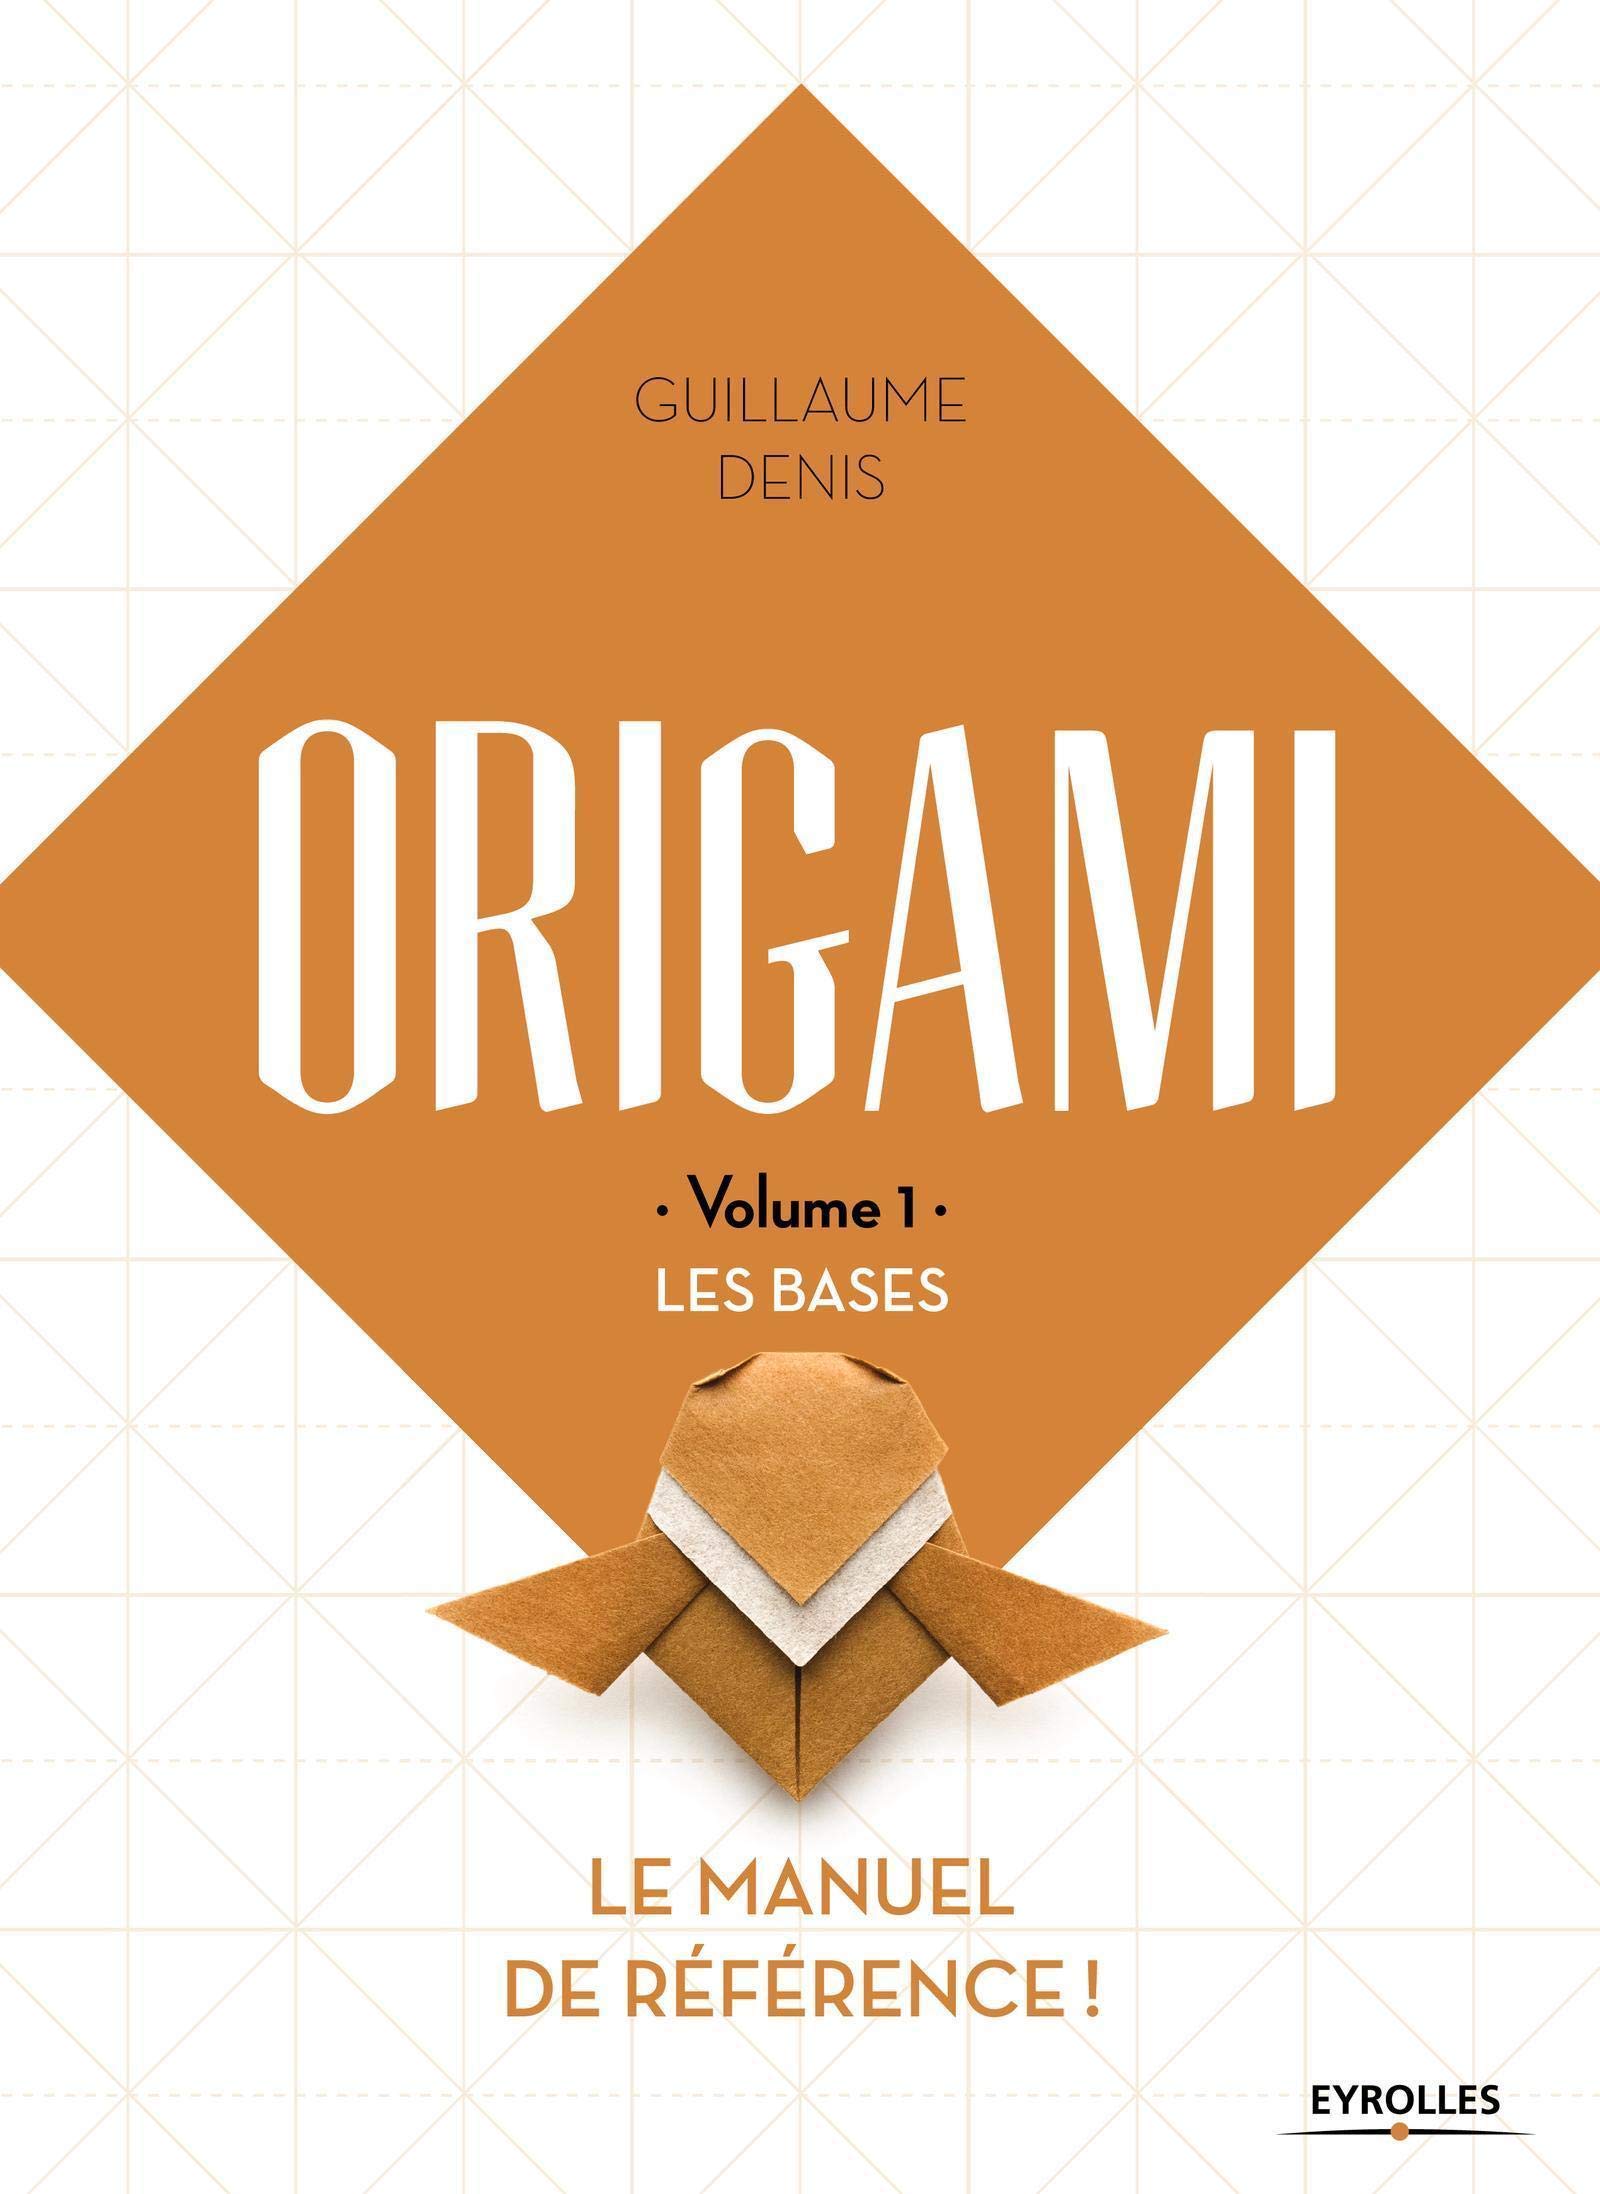 ORIGAMI - Volume 1 - LES BASES : page 72.